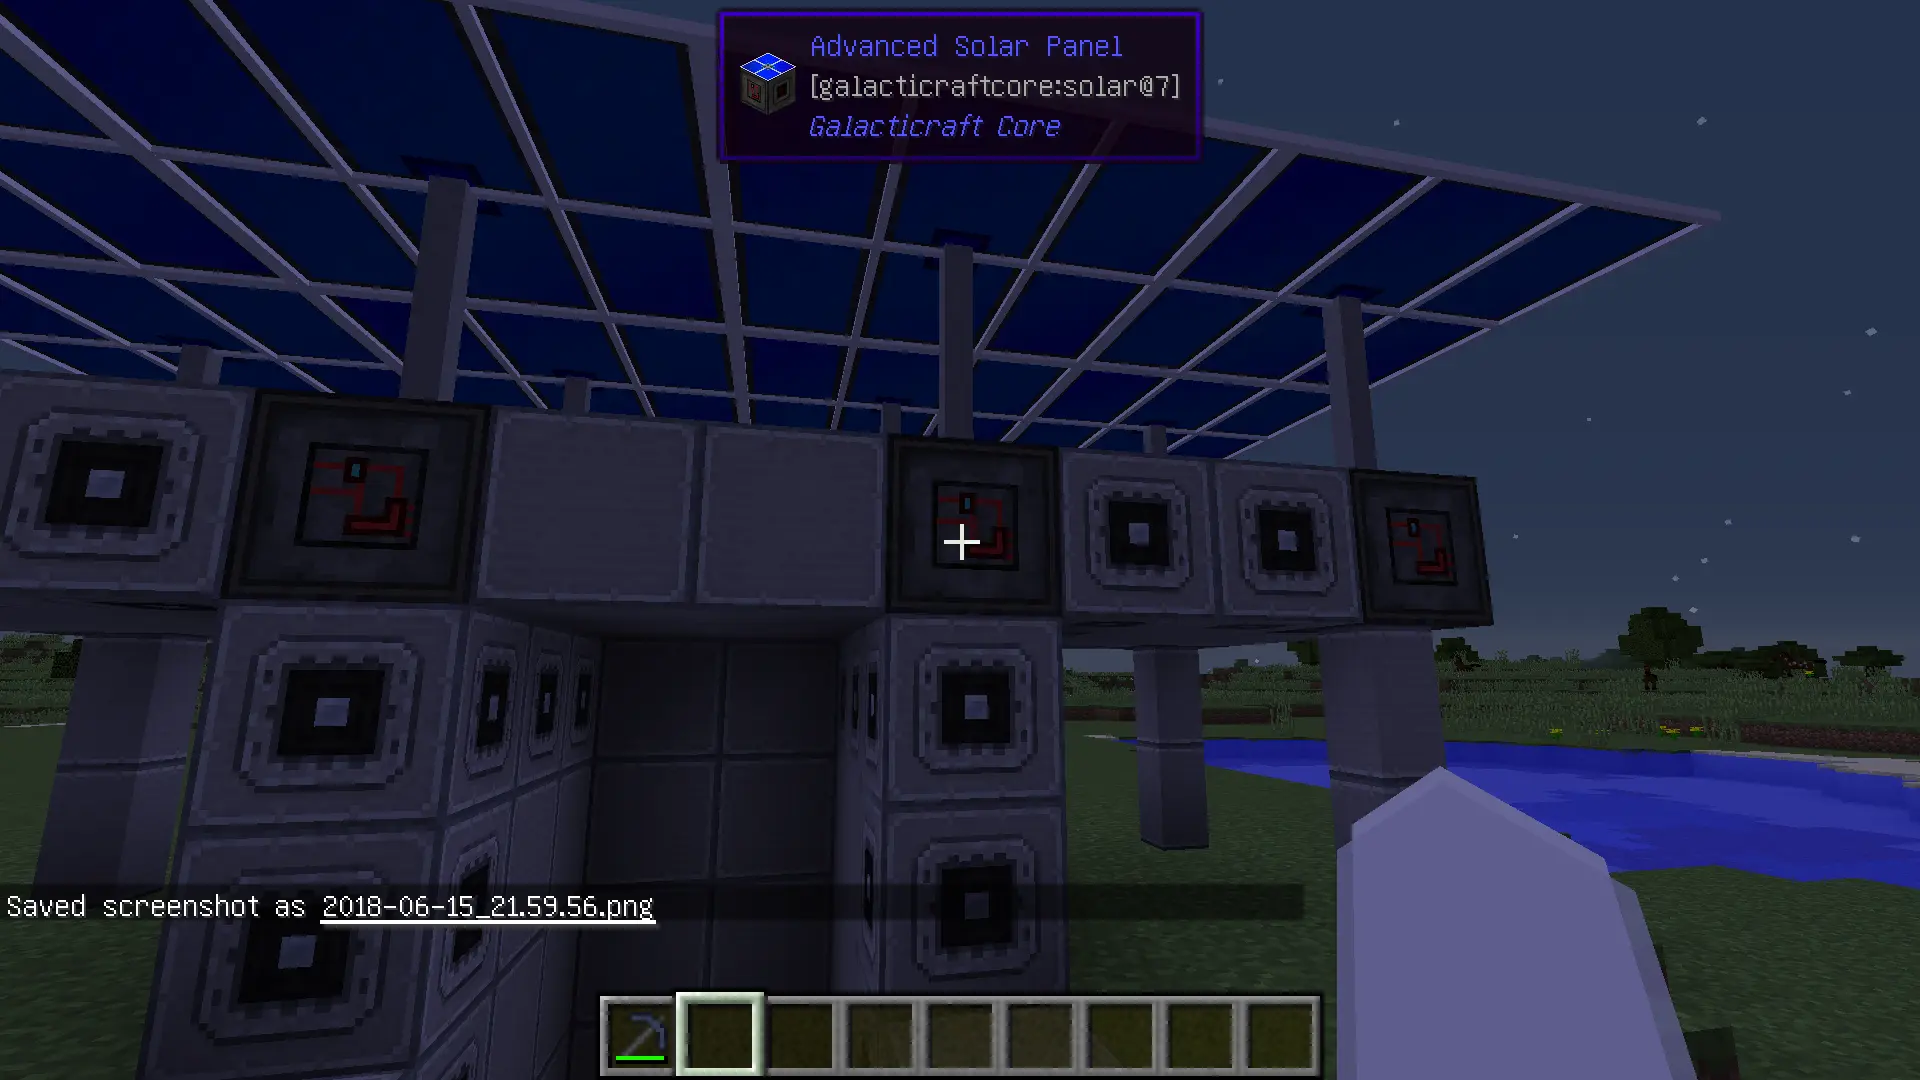 galacticraft solar panels don't work - Why is my portable solar panel not working